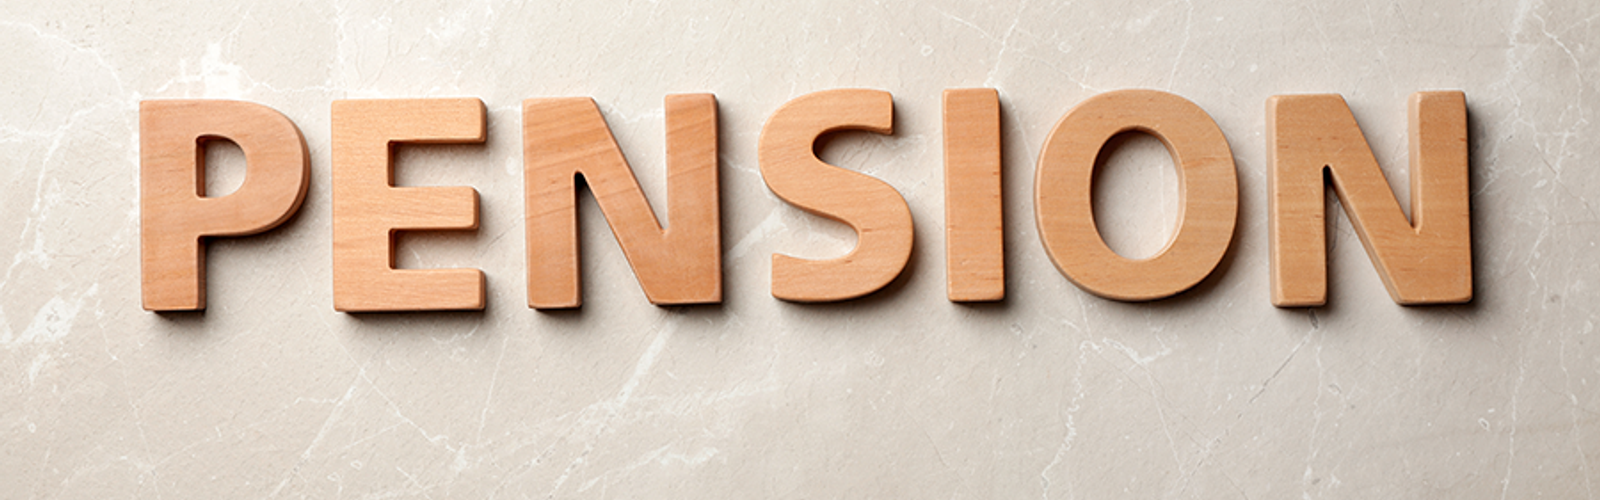 pensions (bs268155331).png